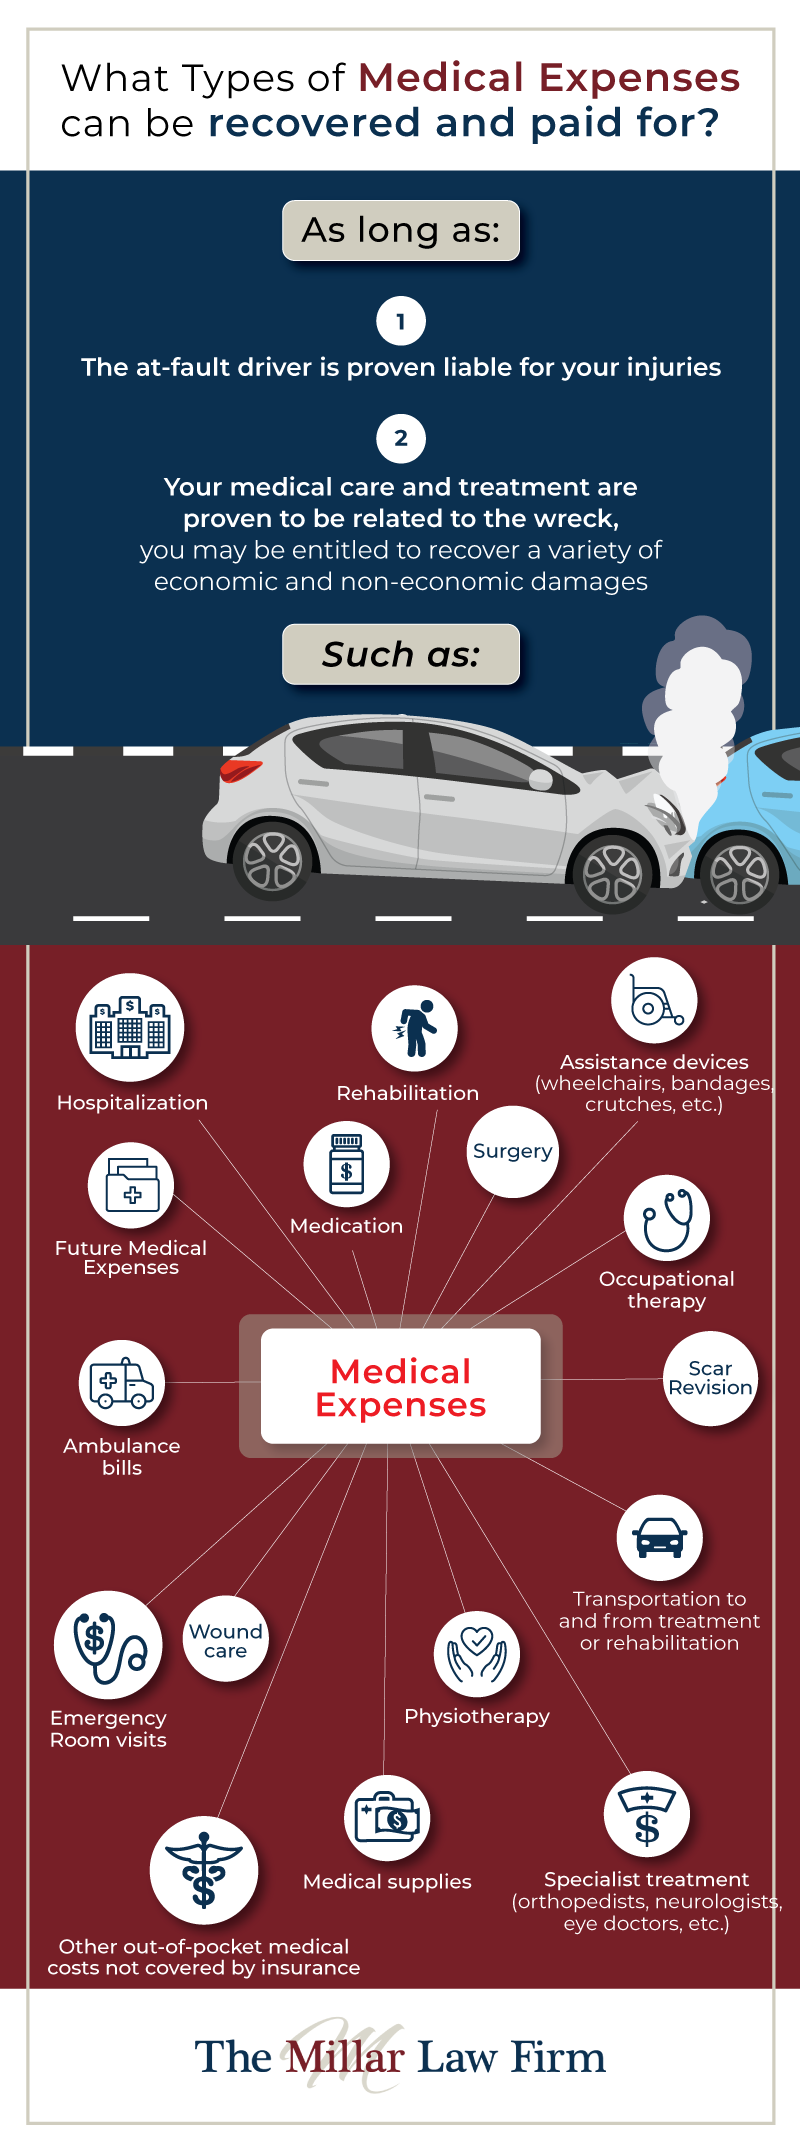 infographic about medical expenses that can be covered